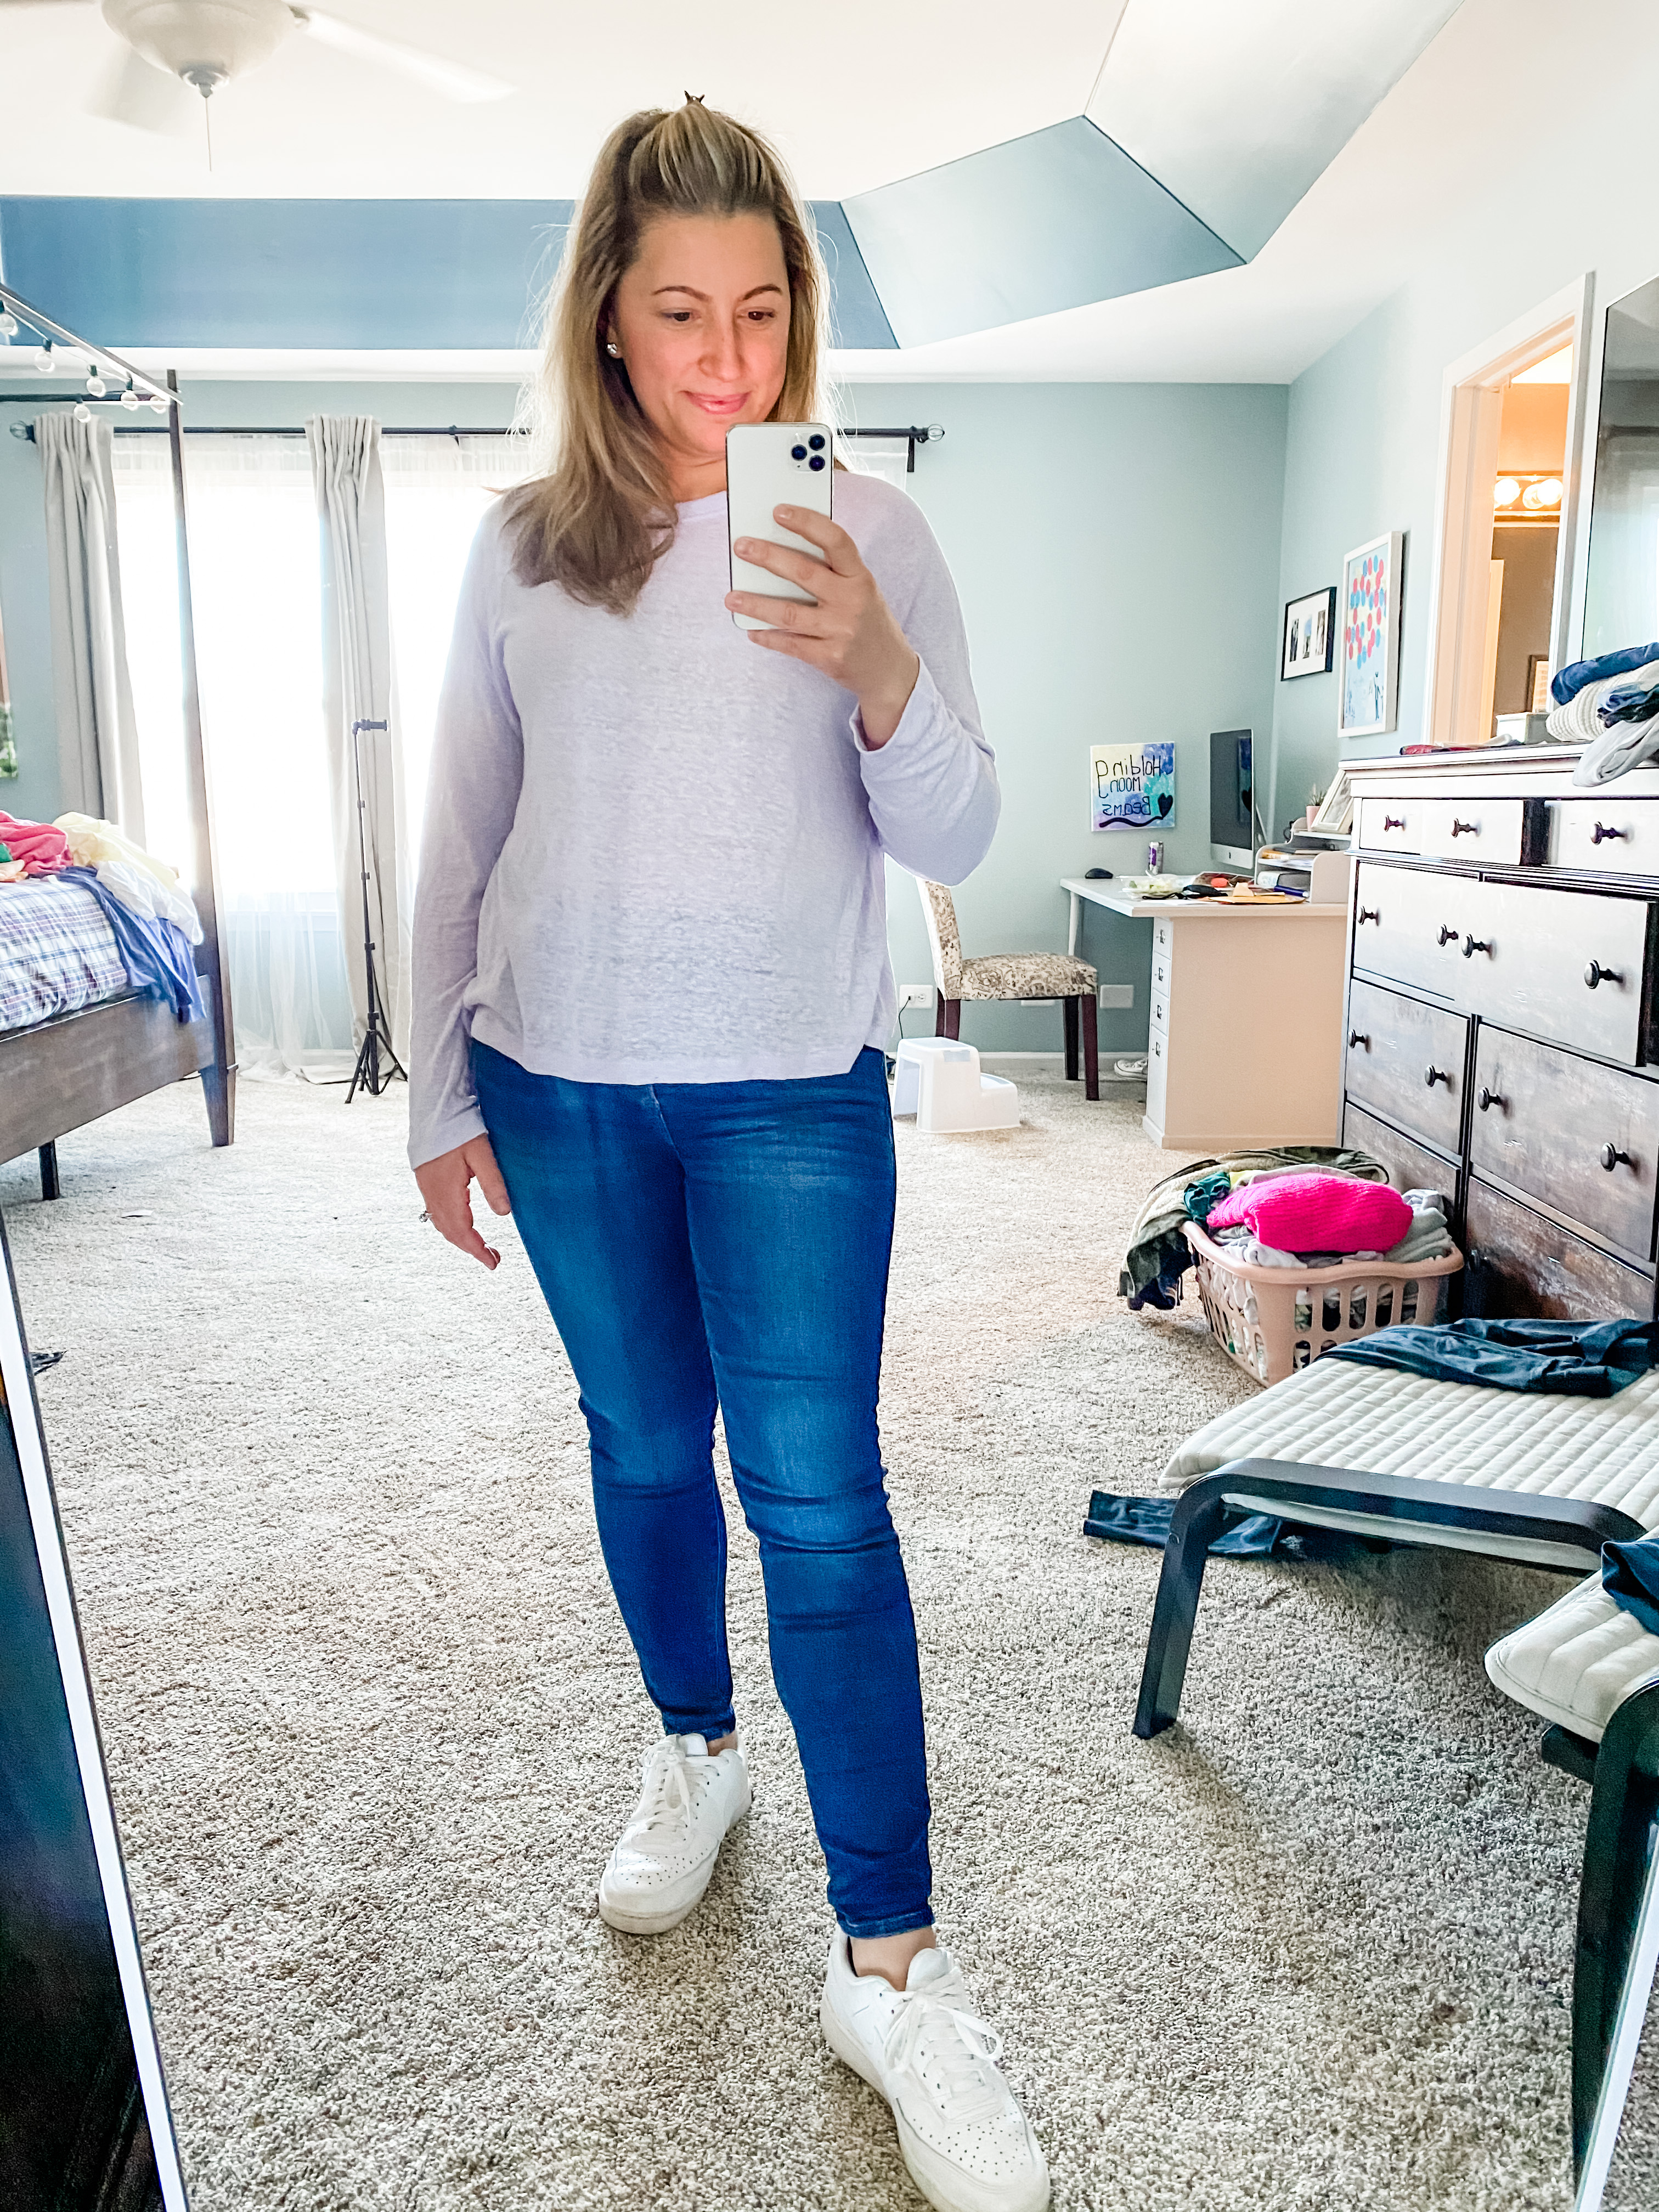 A young female in her 30s is standing in her bedroom with a messy background of furniture and clothes. She is standing full length and a long mirror. She has a pursed smile as she looks into the phone. Her other hand is down by her hip. She is wearing a long sleeve lilac purple shirt that is sheer. Her hair is half up. She’s wearing blue denim jeans with white sneakers. The reflection of the phone glows on her face. She is standingShe is holding her iPhone in one hand and has one hand  on her hip. She has a medium length blonde hair and is smiling while she’s looking into the phone. She is wearing a short-sleeved yellow crewneck T-shirt from target with medium wash blue denim jeans from Abercrombie.If you click on the picture, it takes you to a link where you can shop the items in the photo.